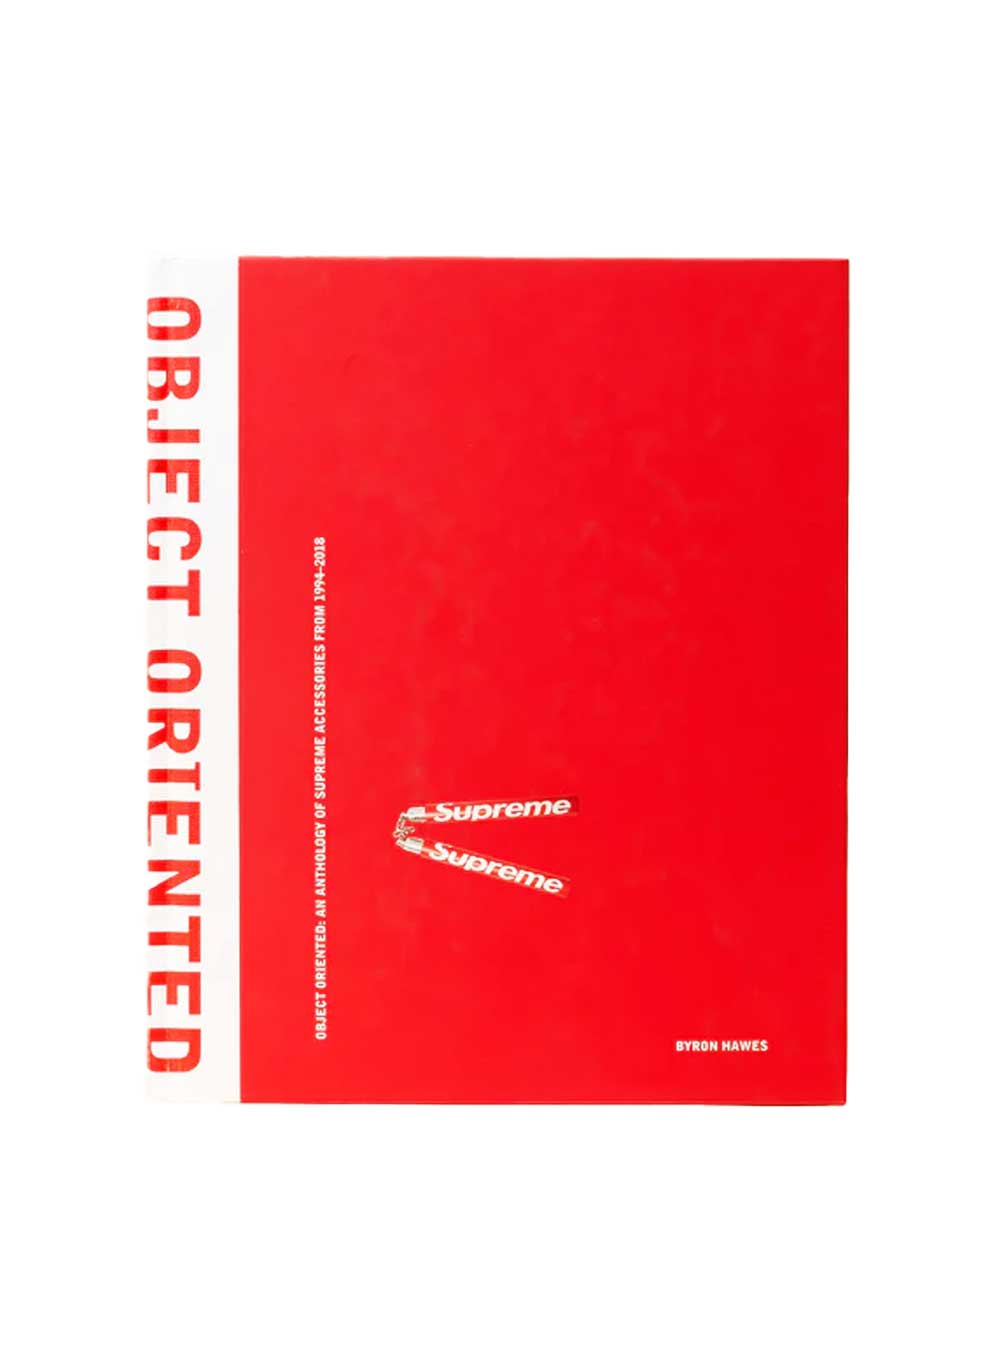 (-9%) Object Oriented: An Anthology of Supreme Accessories from 1994-2018